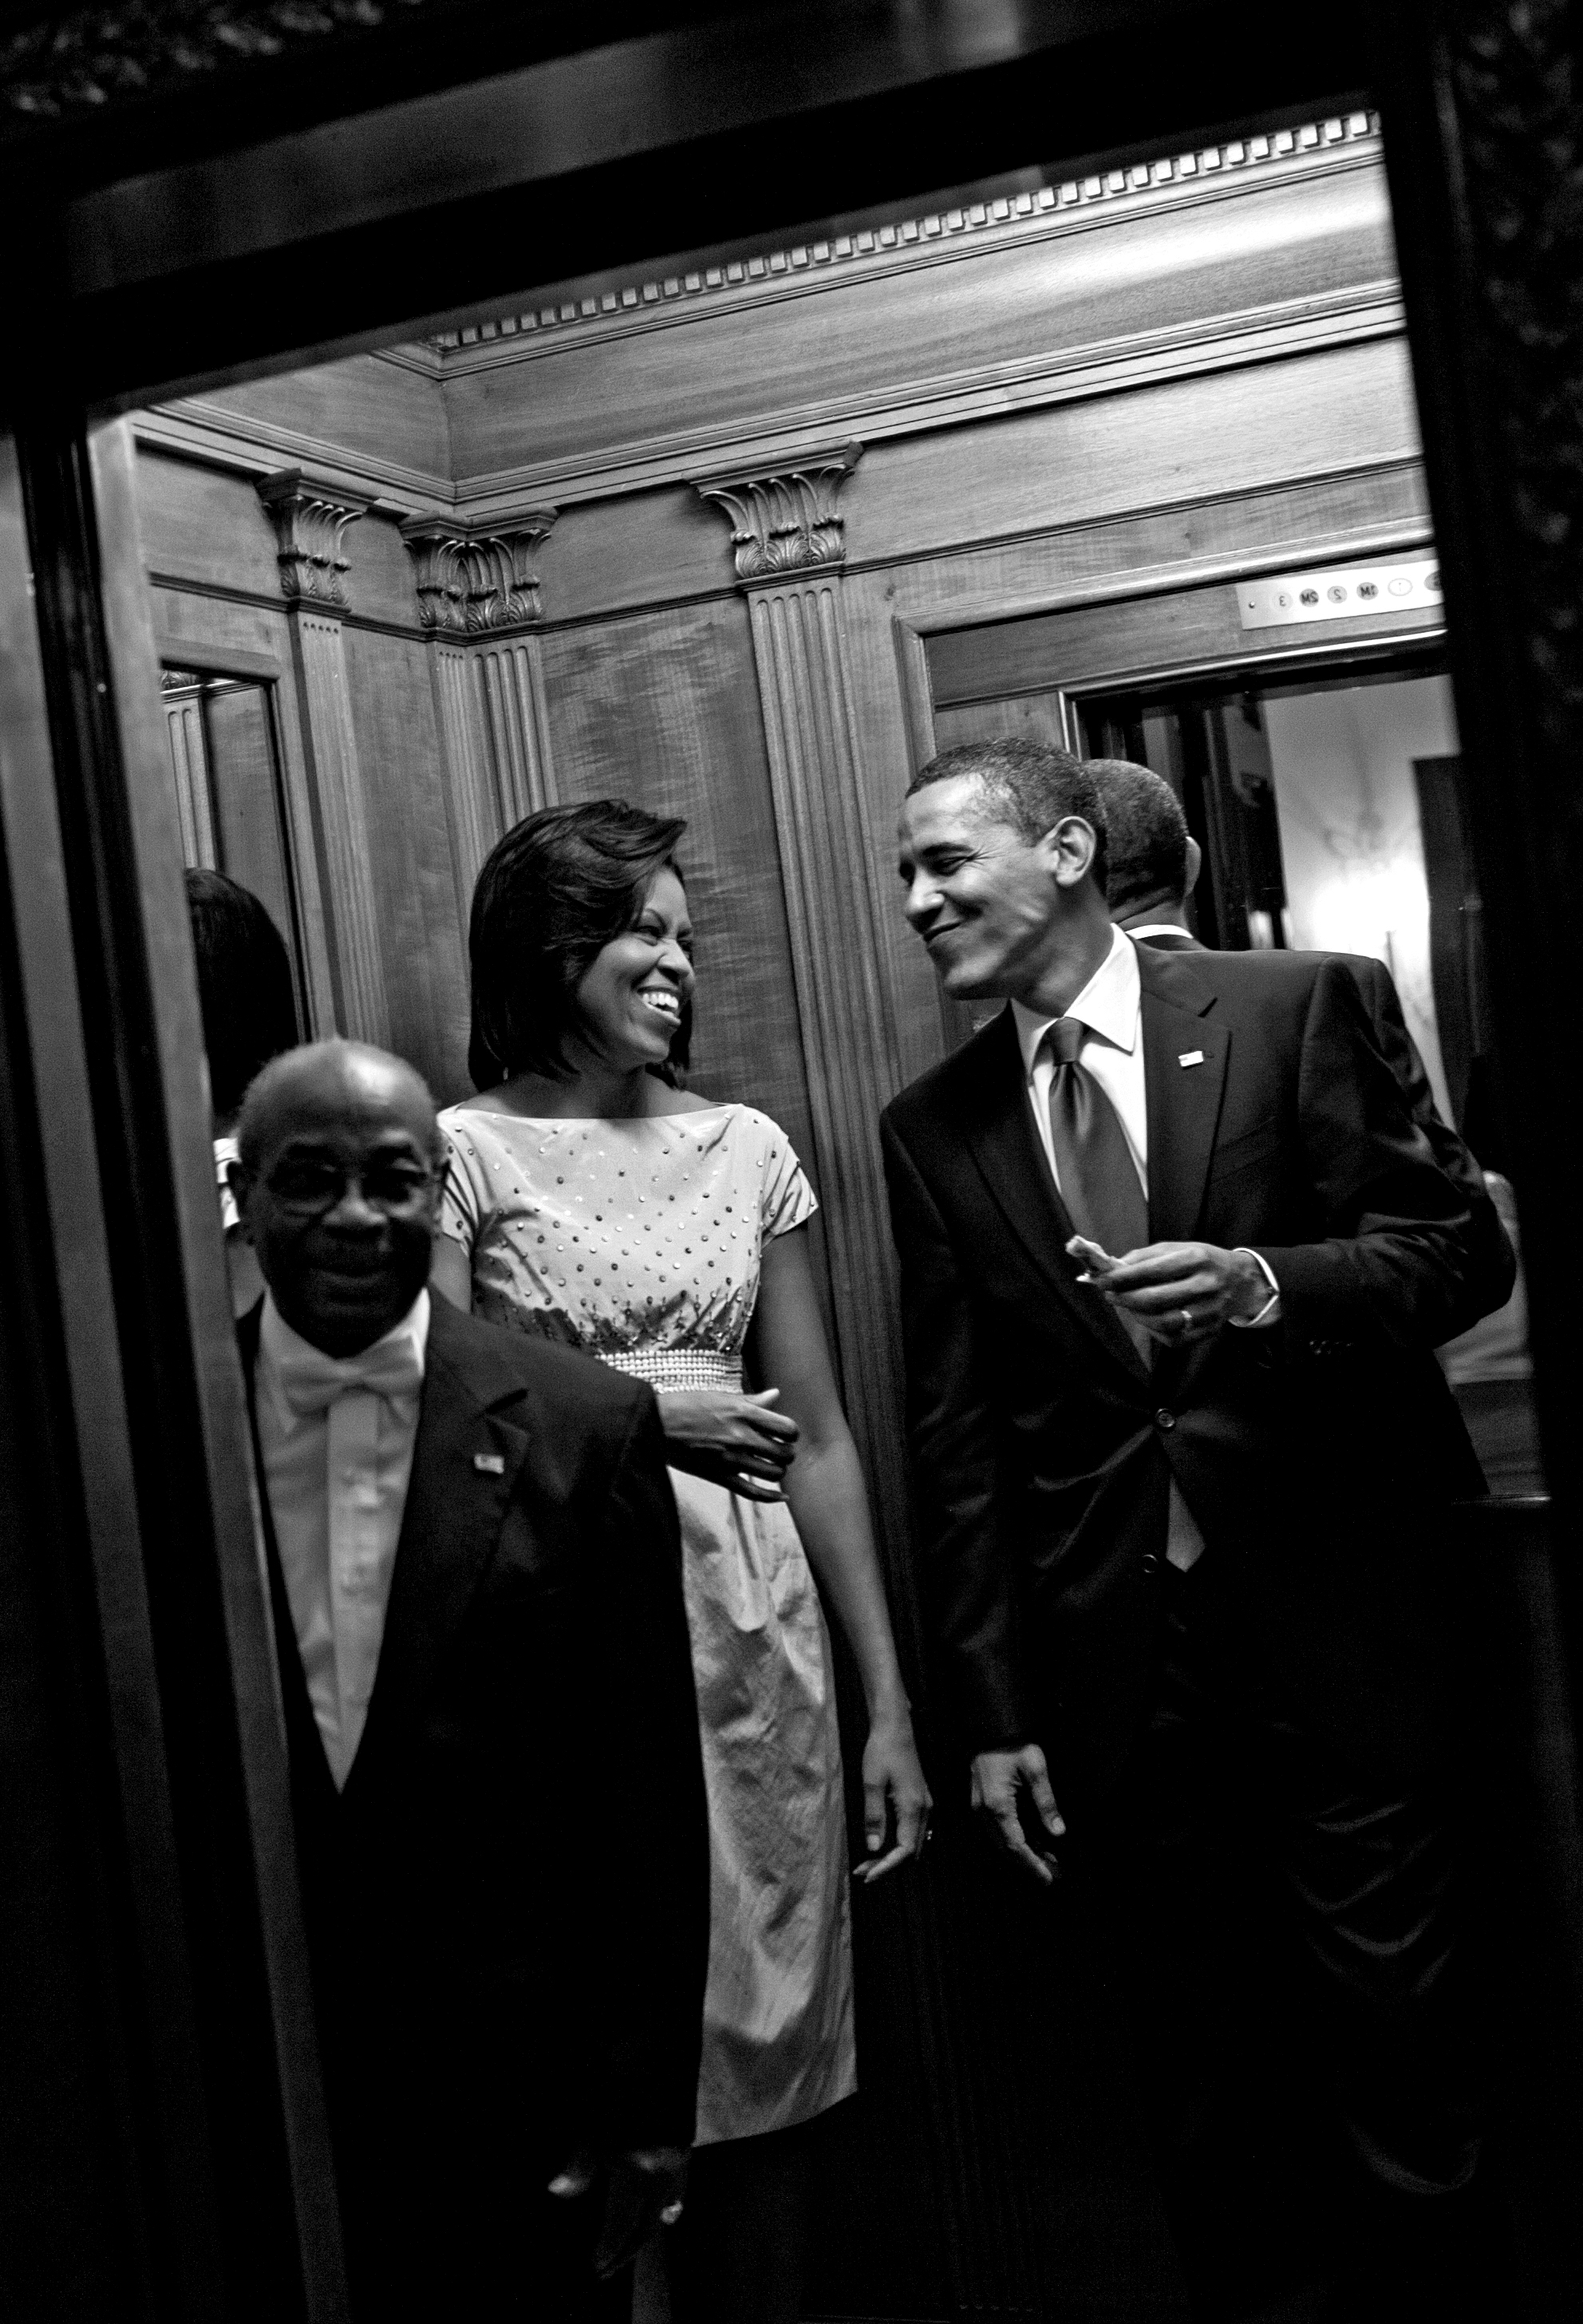 Michelle and Barack Obama head back to the residence via the elevator after a celebration of Cinco de Mayo at the White House. May 4, 2009 (Official White House Photo by Samantha Appleton)